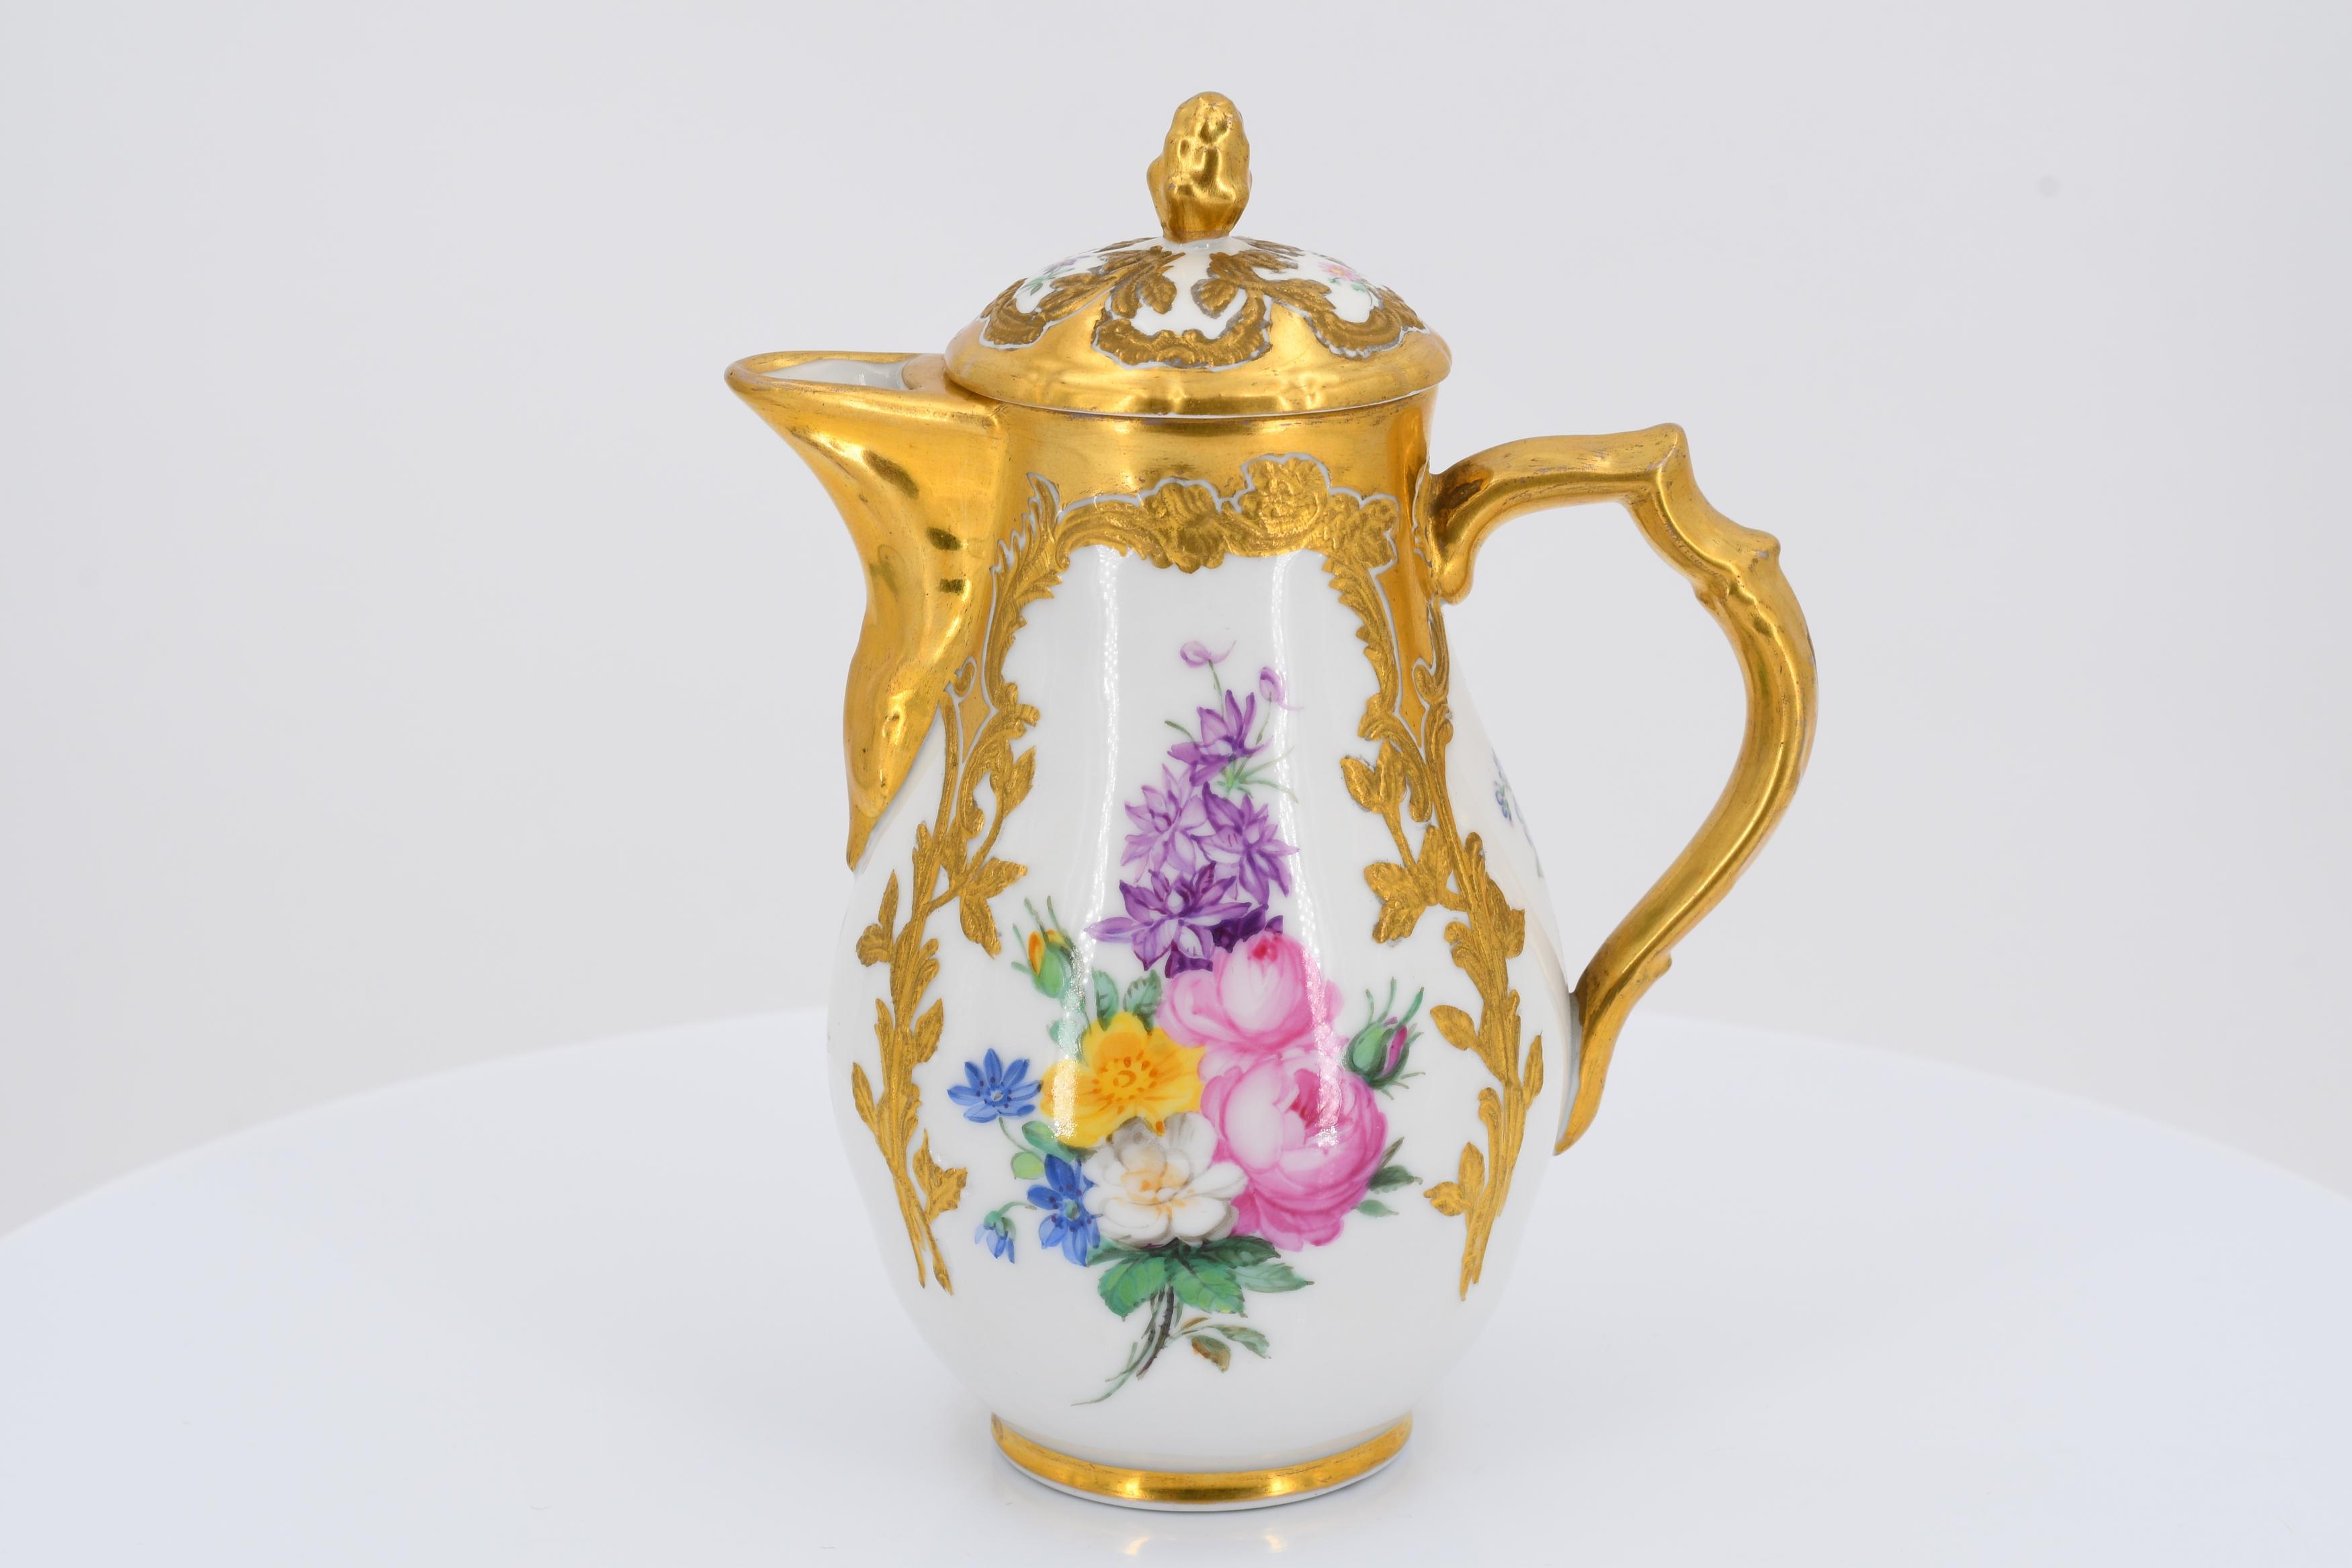 Magnificent procelain coffee and tea service with lavish flower decor - Image 16 of 27